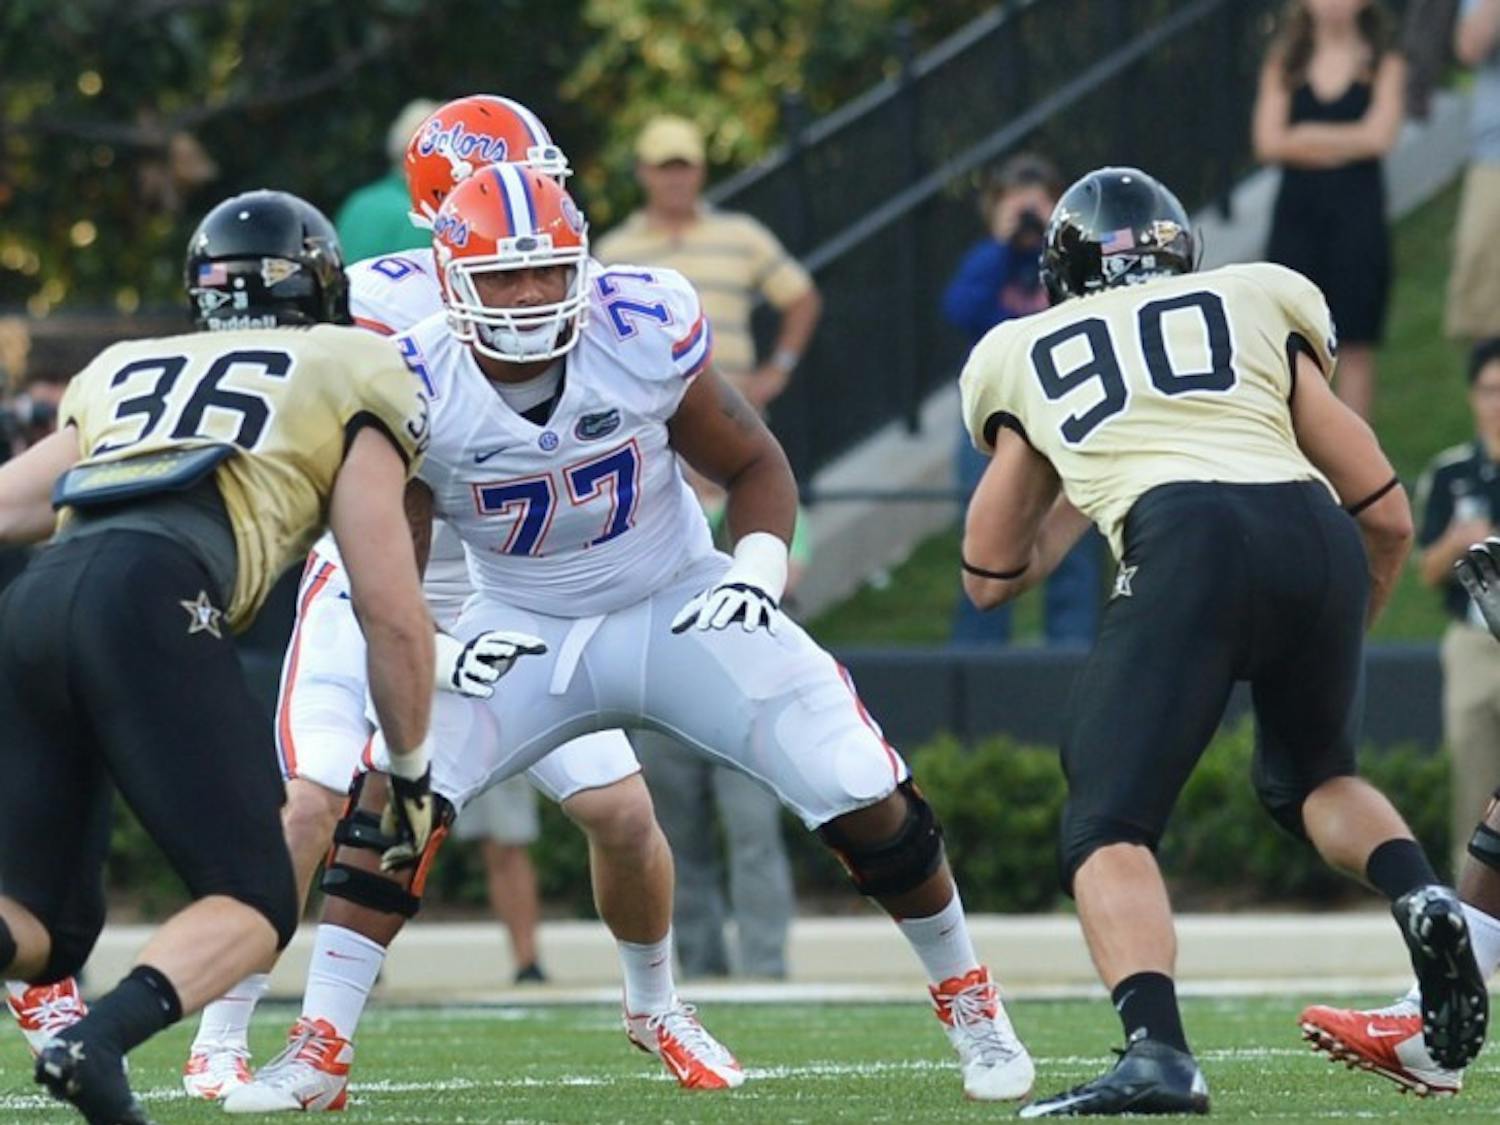 Guard Ian Silberman (77) blocks for quarterback Jeff Driskel against Vanderbilt in 2012. Silberman will transfer from Florida and will play out his final season of eligibility elsewhere next season.&nbsp;